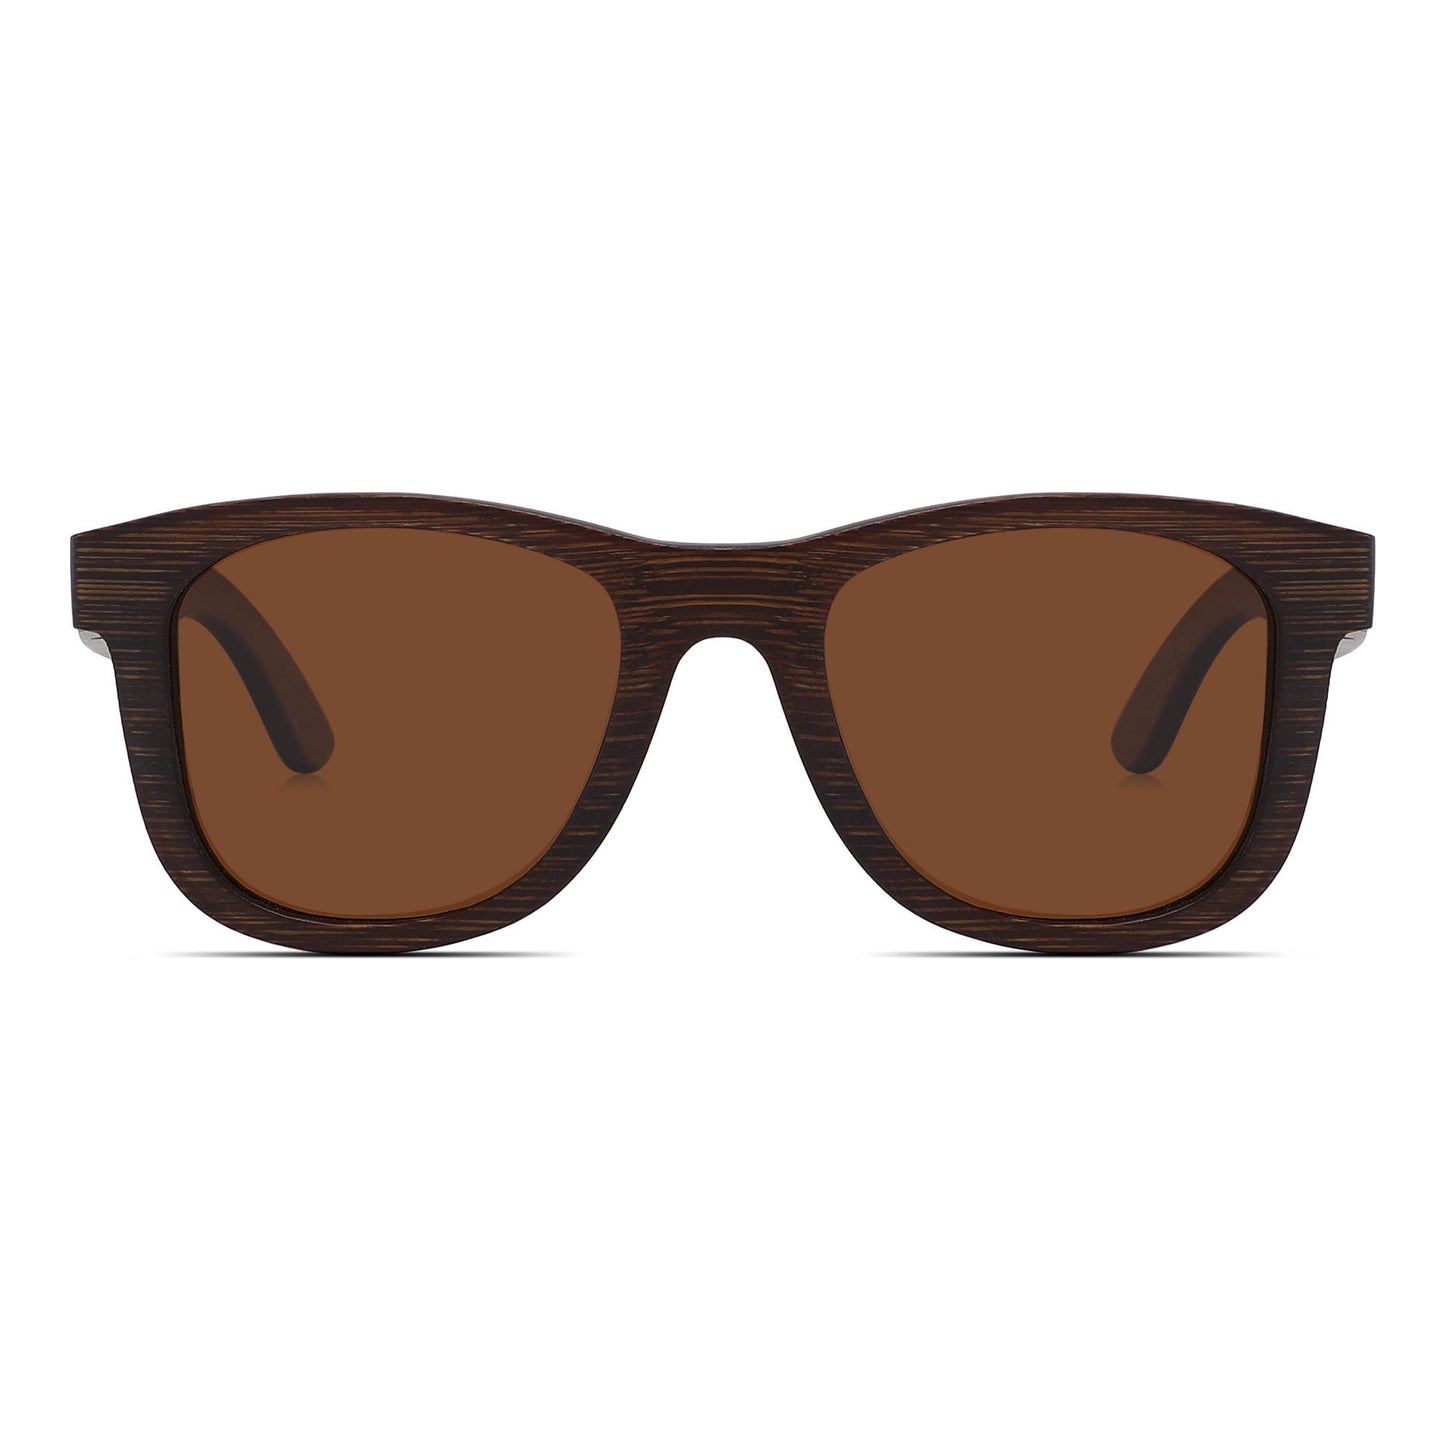 Natural Bamboo Sunglasses Dark Brown all wood frames and sides -with Polarized UV400 Lenses